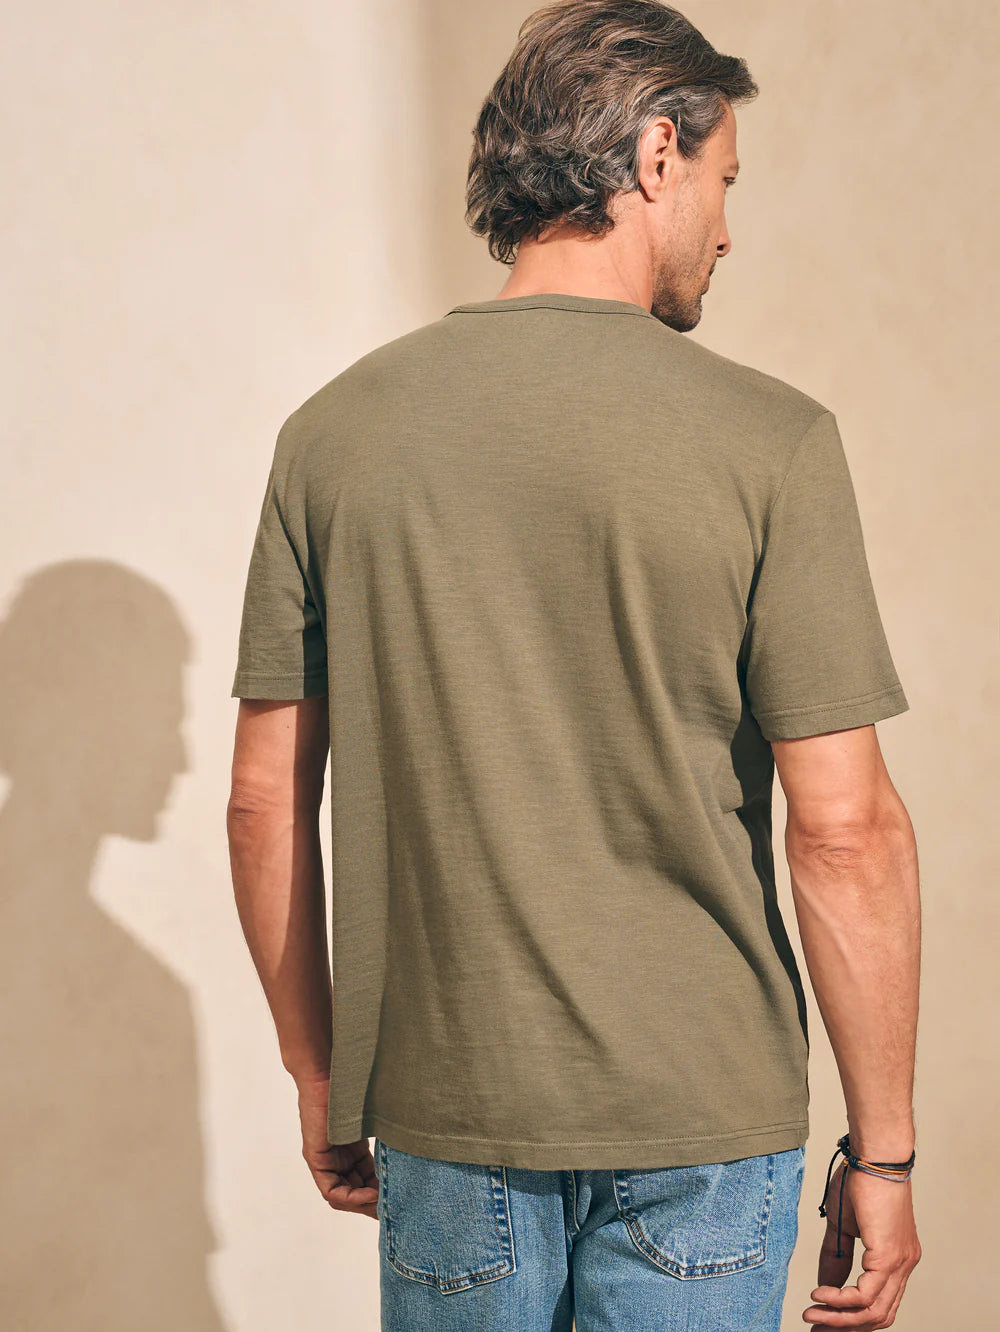 back view of man wearing an olive green short sleeve t-shirt by Faherty